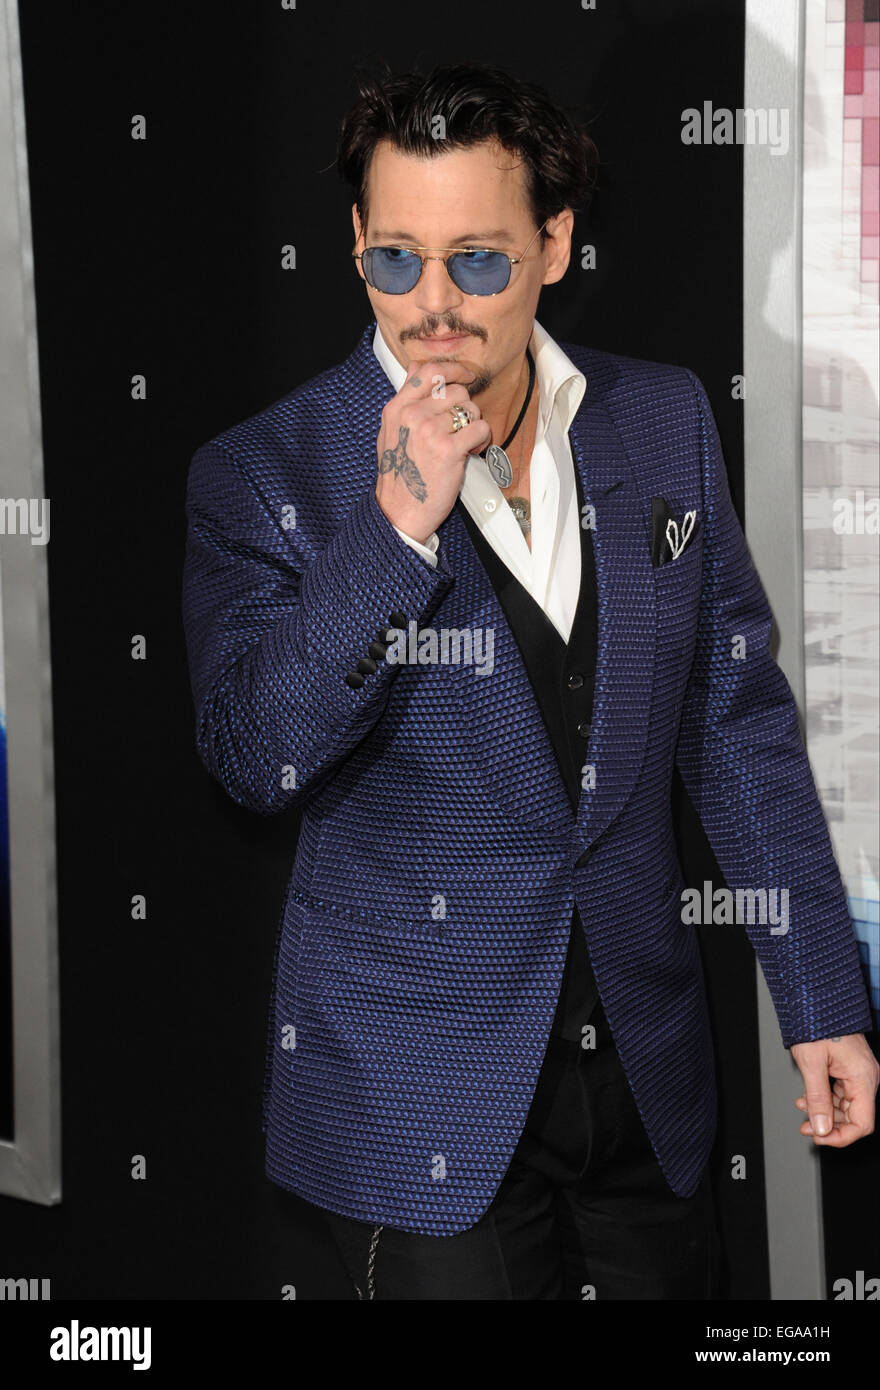 LOS ANGELES, CA - APRIL 10, 2014: Johnny Depp at the Los Angeles premiere of his movie 'Transcendence' at the Regency Village Theatre, Westwood. Stock Photo